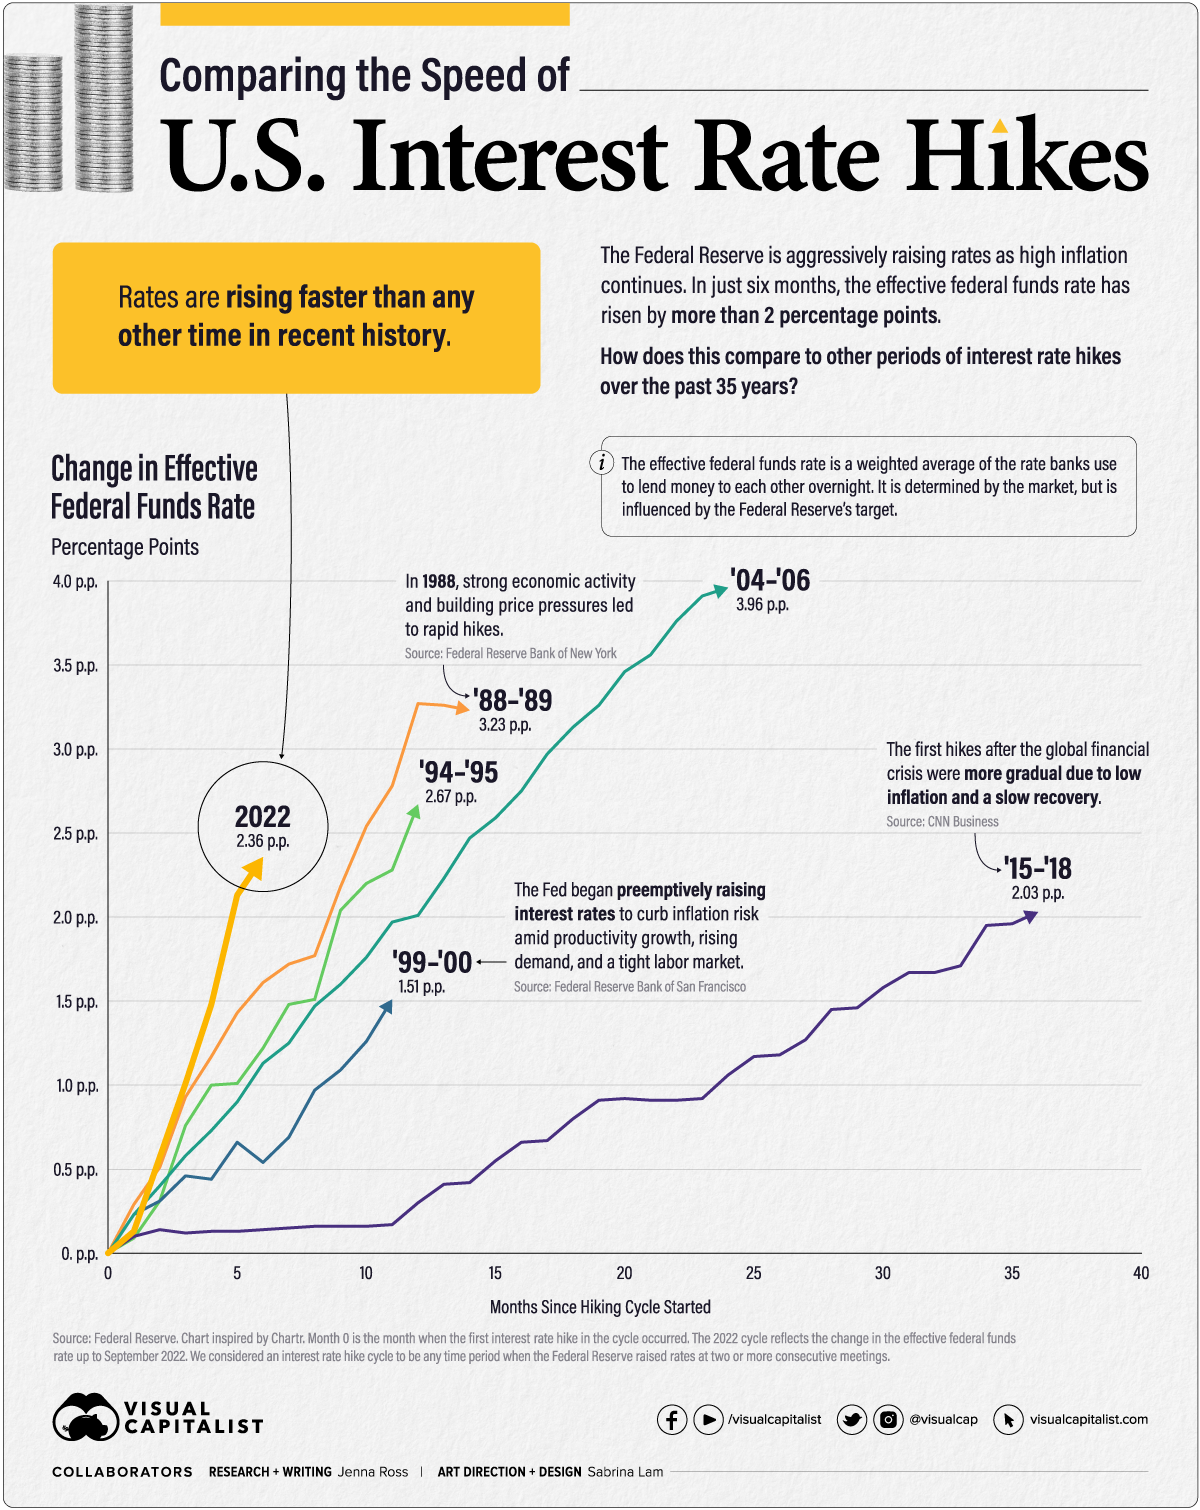 https://www.visualcapitalist.com/wp-content/uploads/2022/10/speed-of-interest-rate-hikes-2022.png